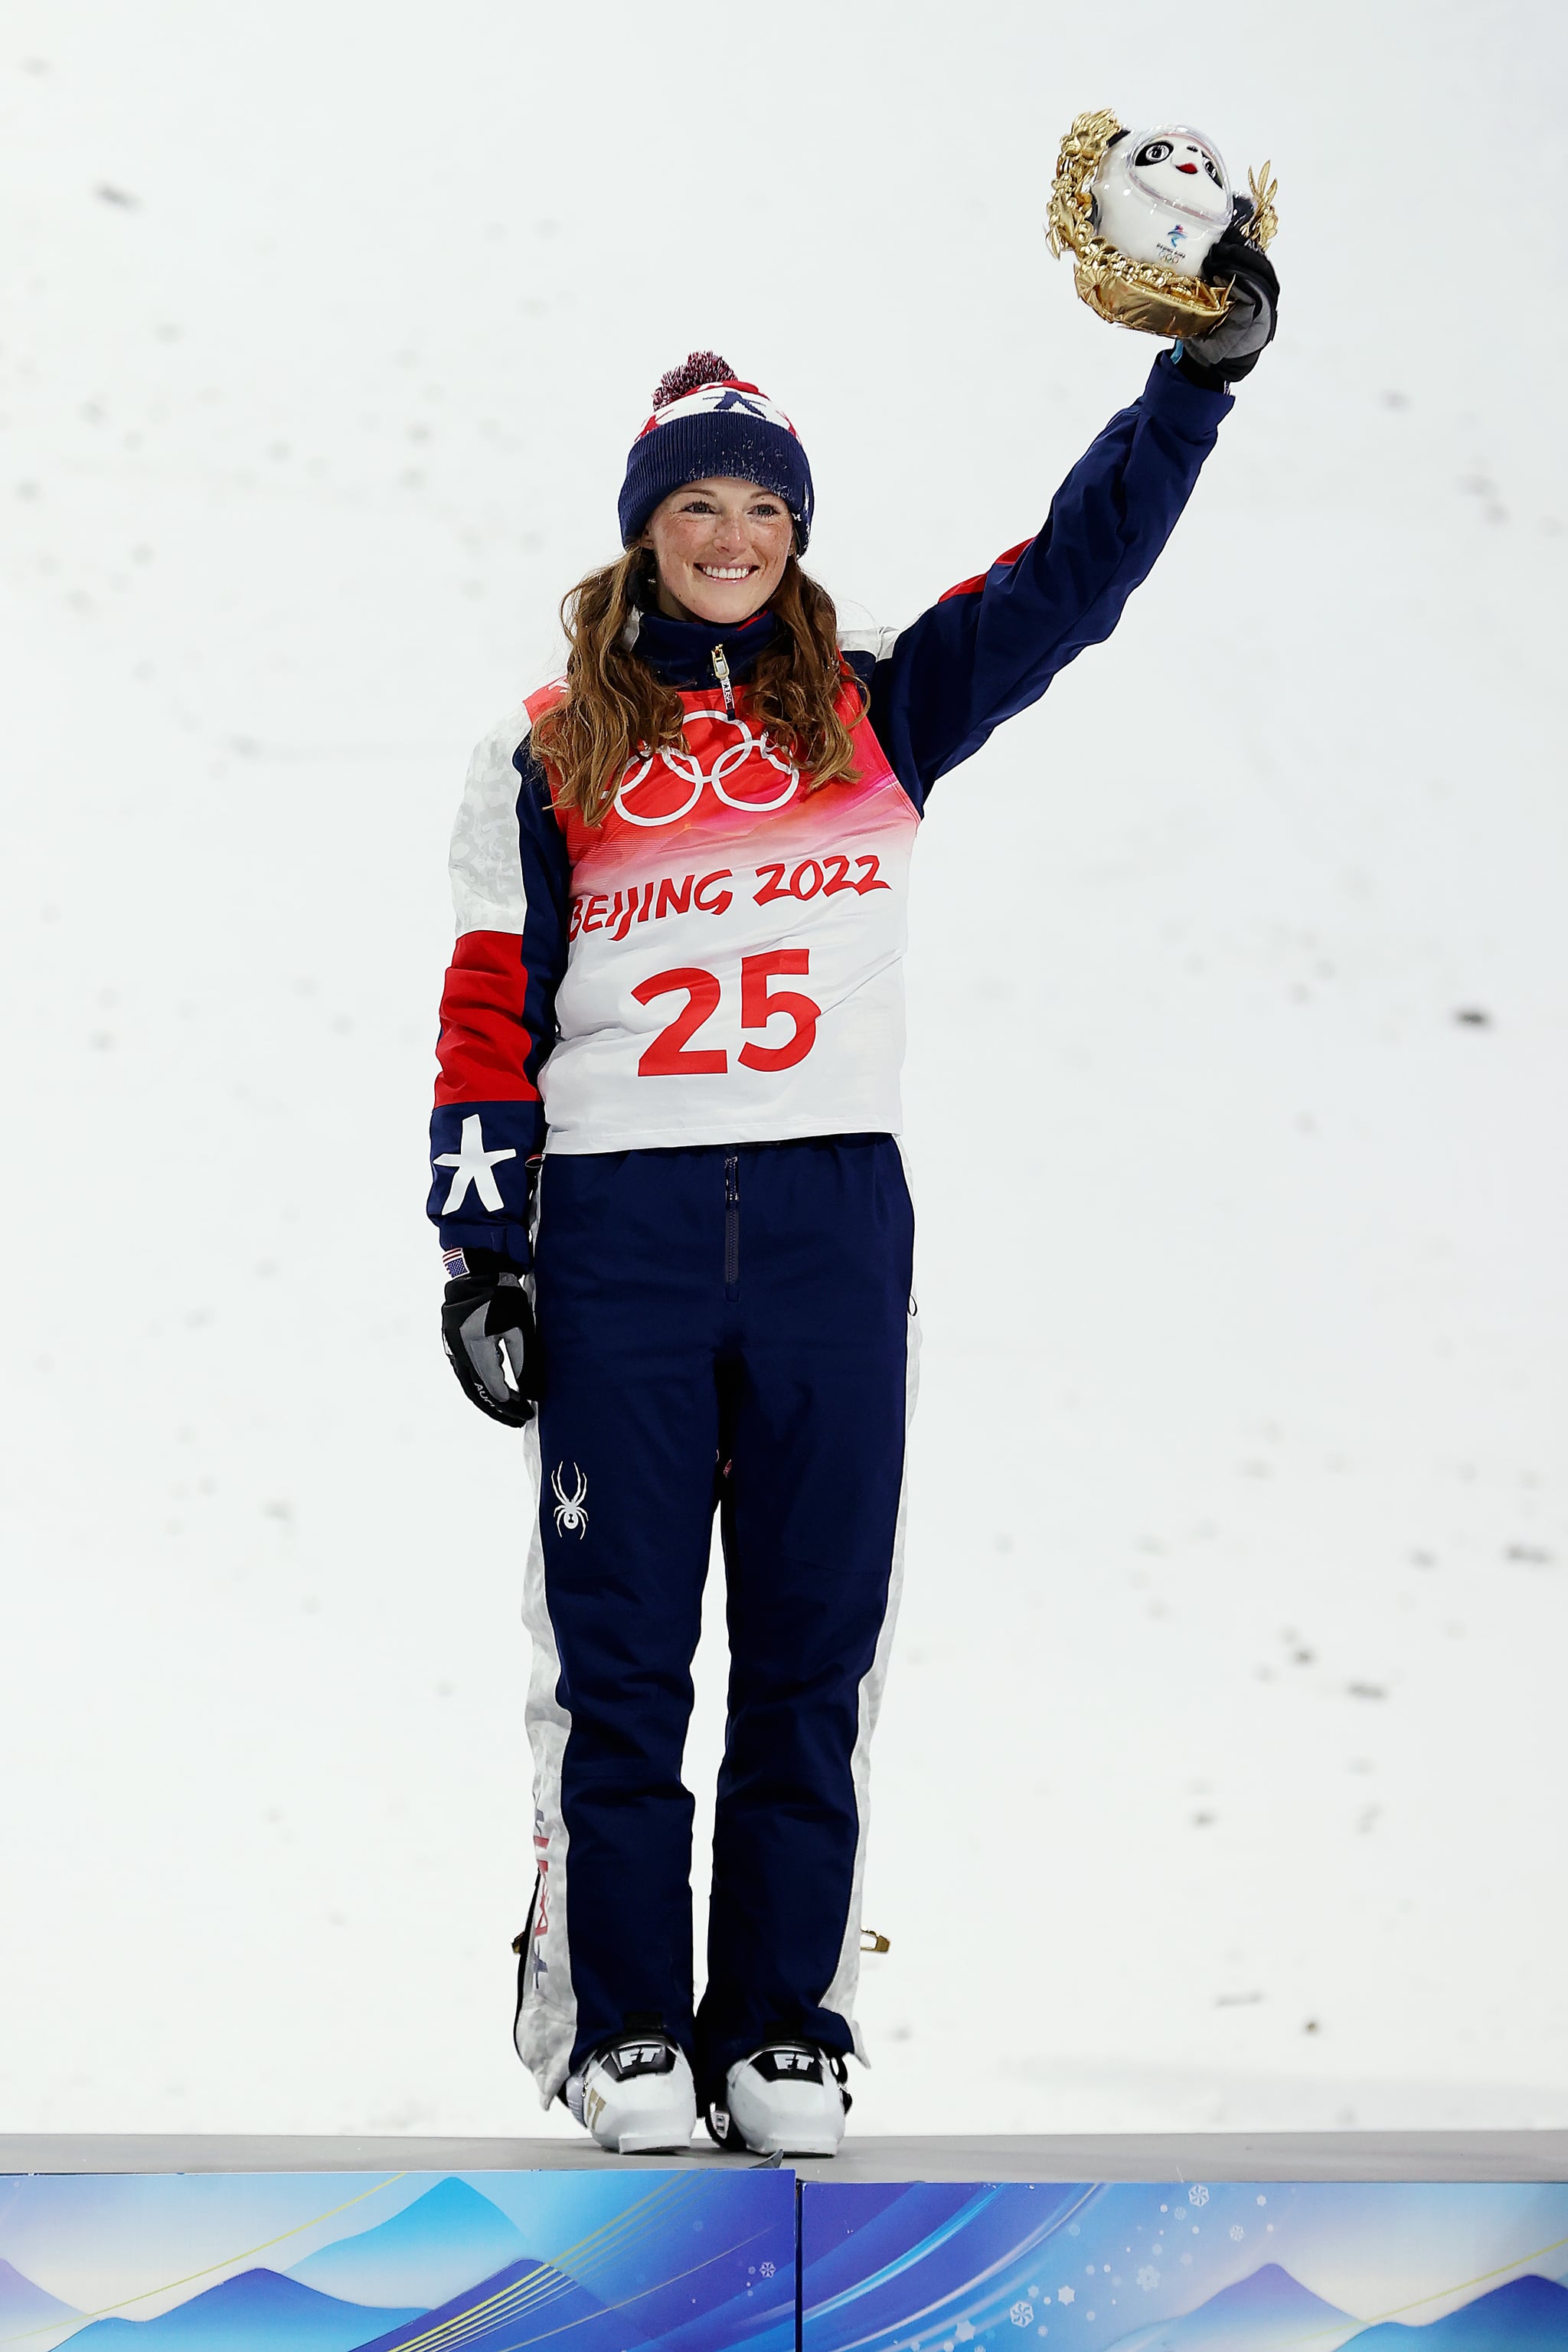 ZHANGJIAKOU, CHINA - FEBRUARY 14: Bronze medalist Megan Nick of Team United States celebrates during the Women's Freestyle Skiing Aerials Final flower ceremony on Day 10 of the Beijing 2022 Winter Olympics at Genting Snow Park on February 14, 2022 in Zhangjiakou, China. (Photo by Cameron Spencer/Getty Images)